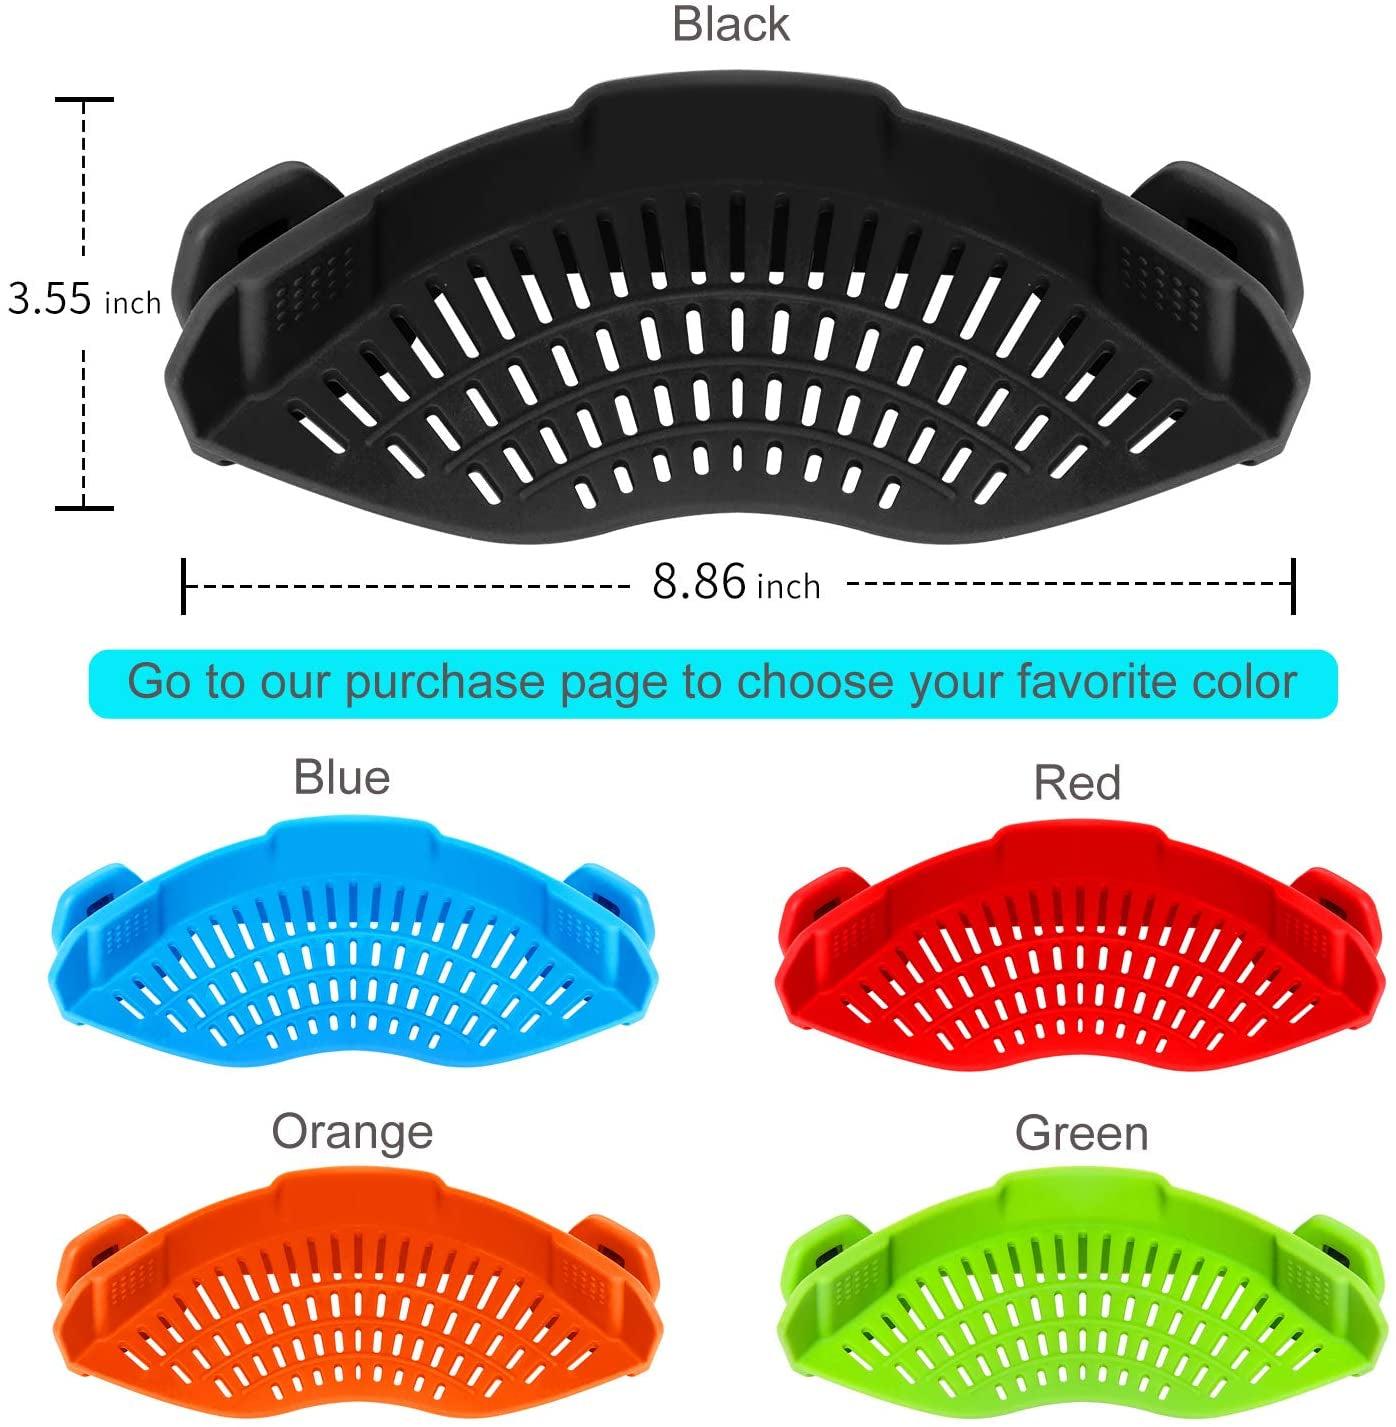 Clip on Strainer Silicone for All Pots and Pans, Pasta Strainer Clip on Food Strainer for Meat Vegetables Fruit Silicone Kitchen Colander